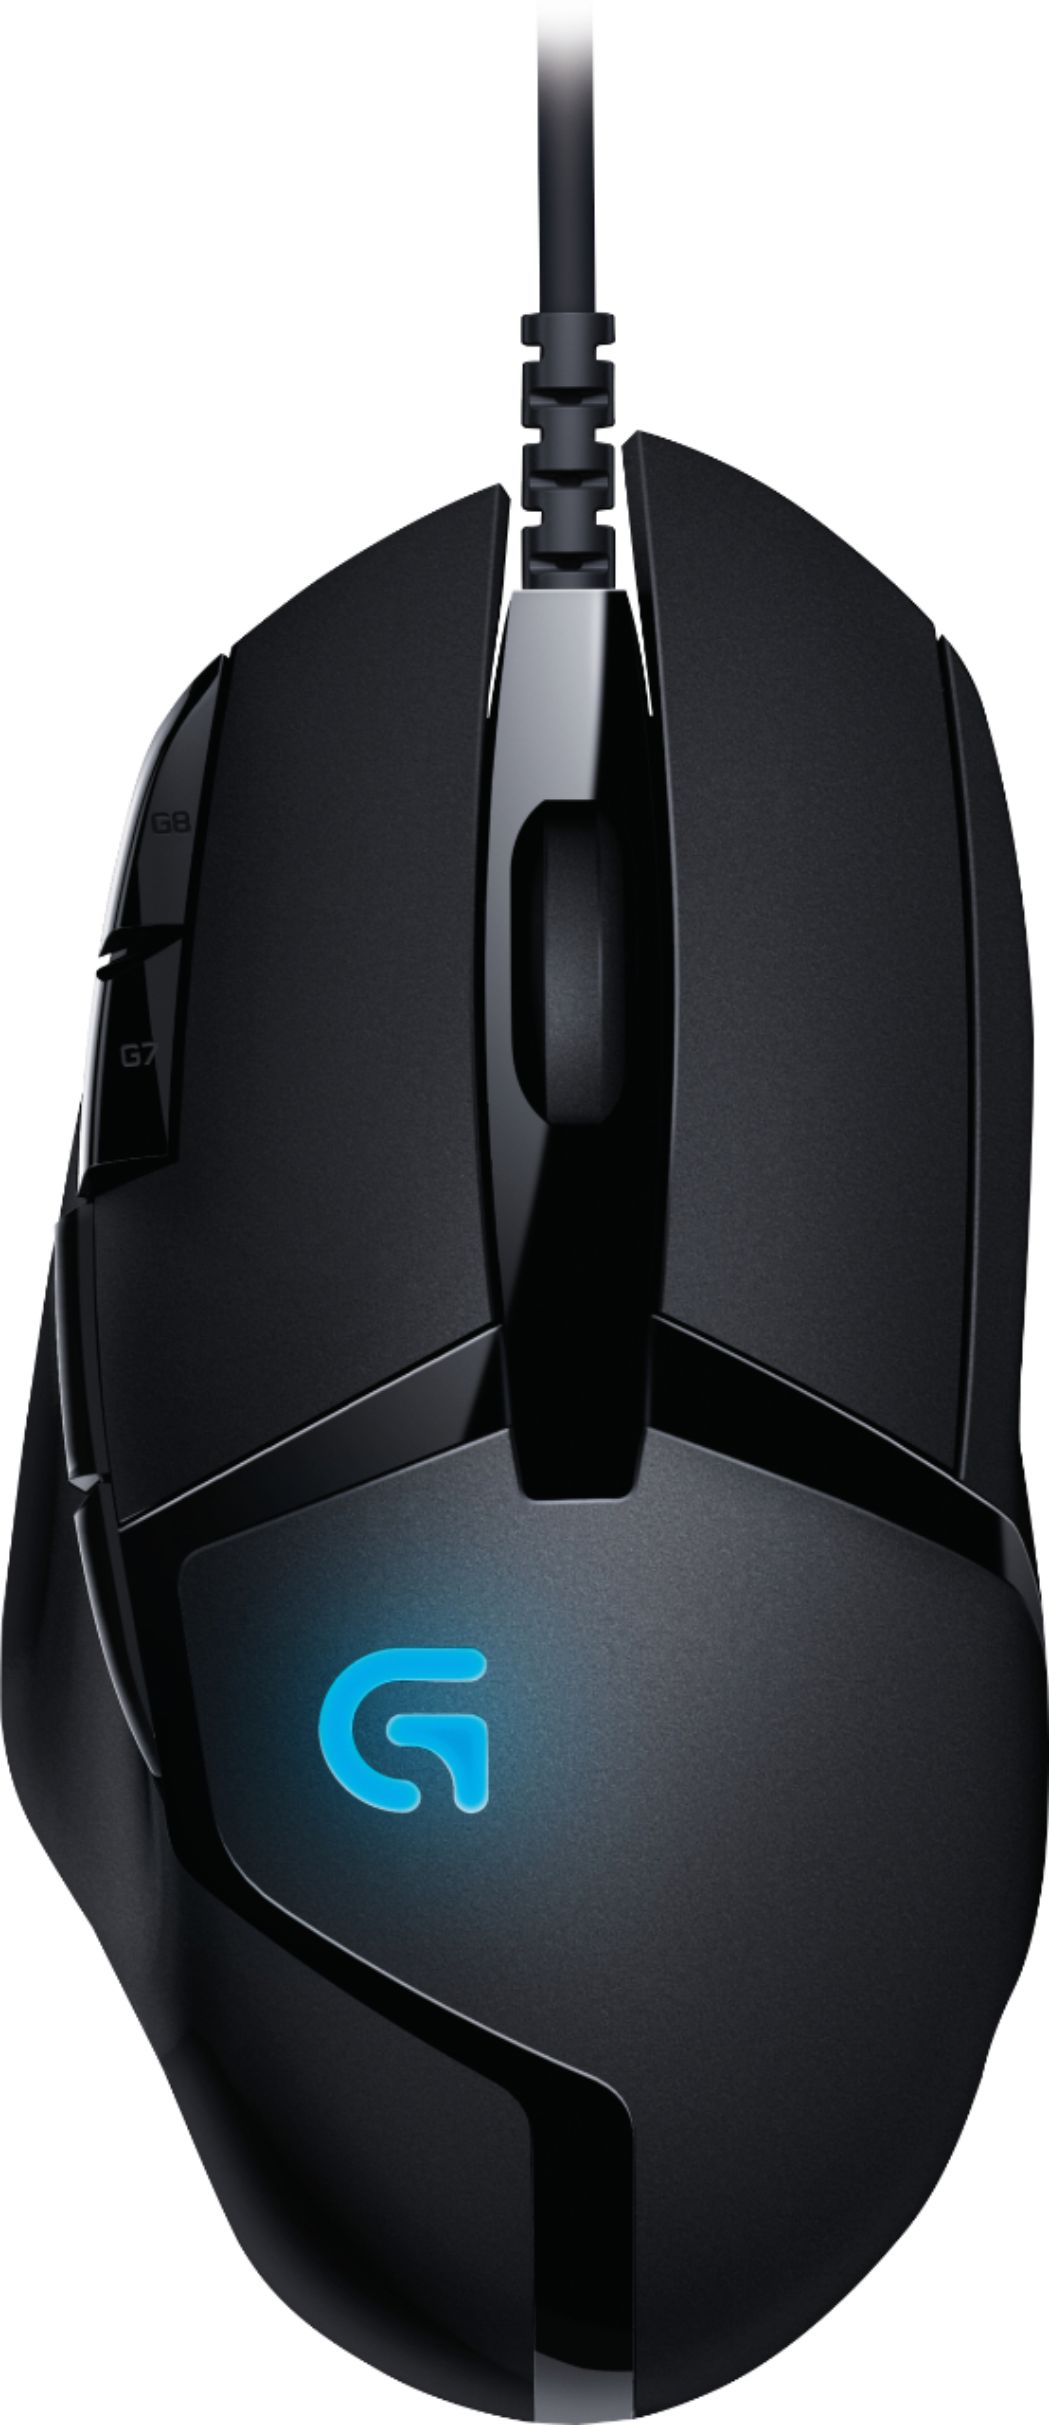 Best Buy Logitech G402 Hyperion Fury Optical Gaming Mouse Black 910